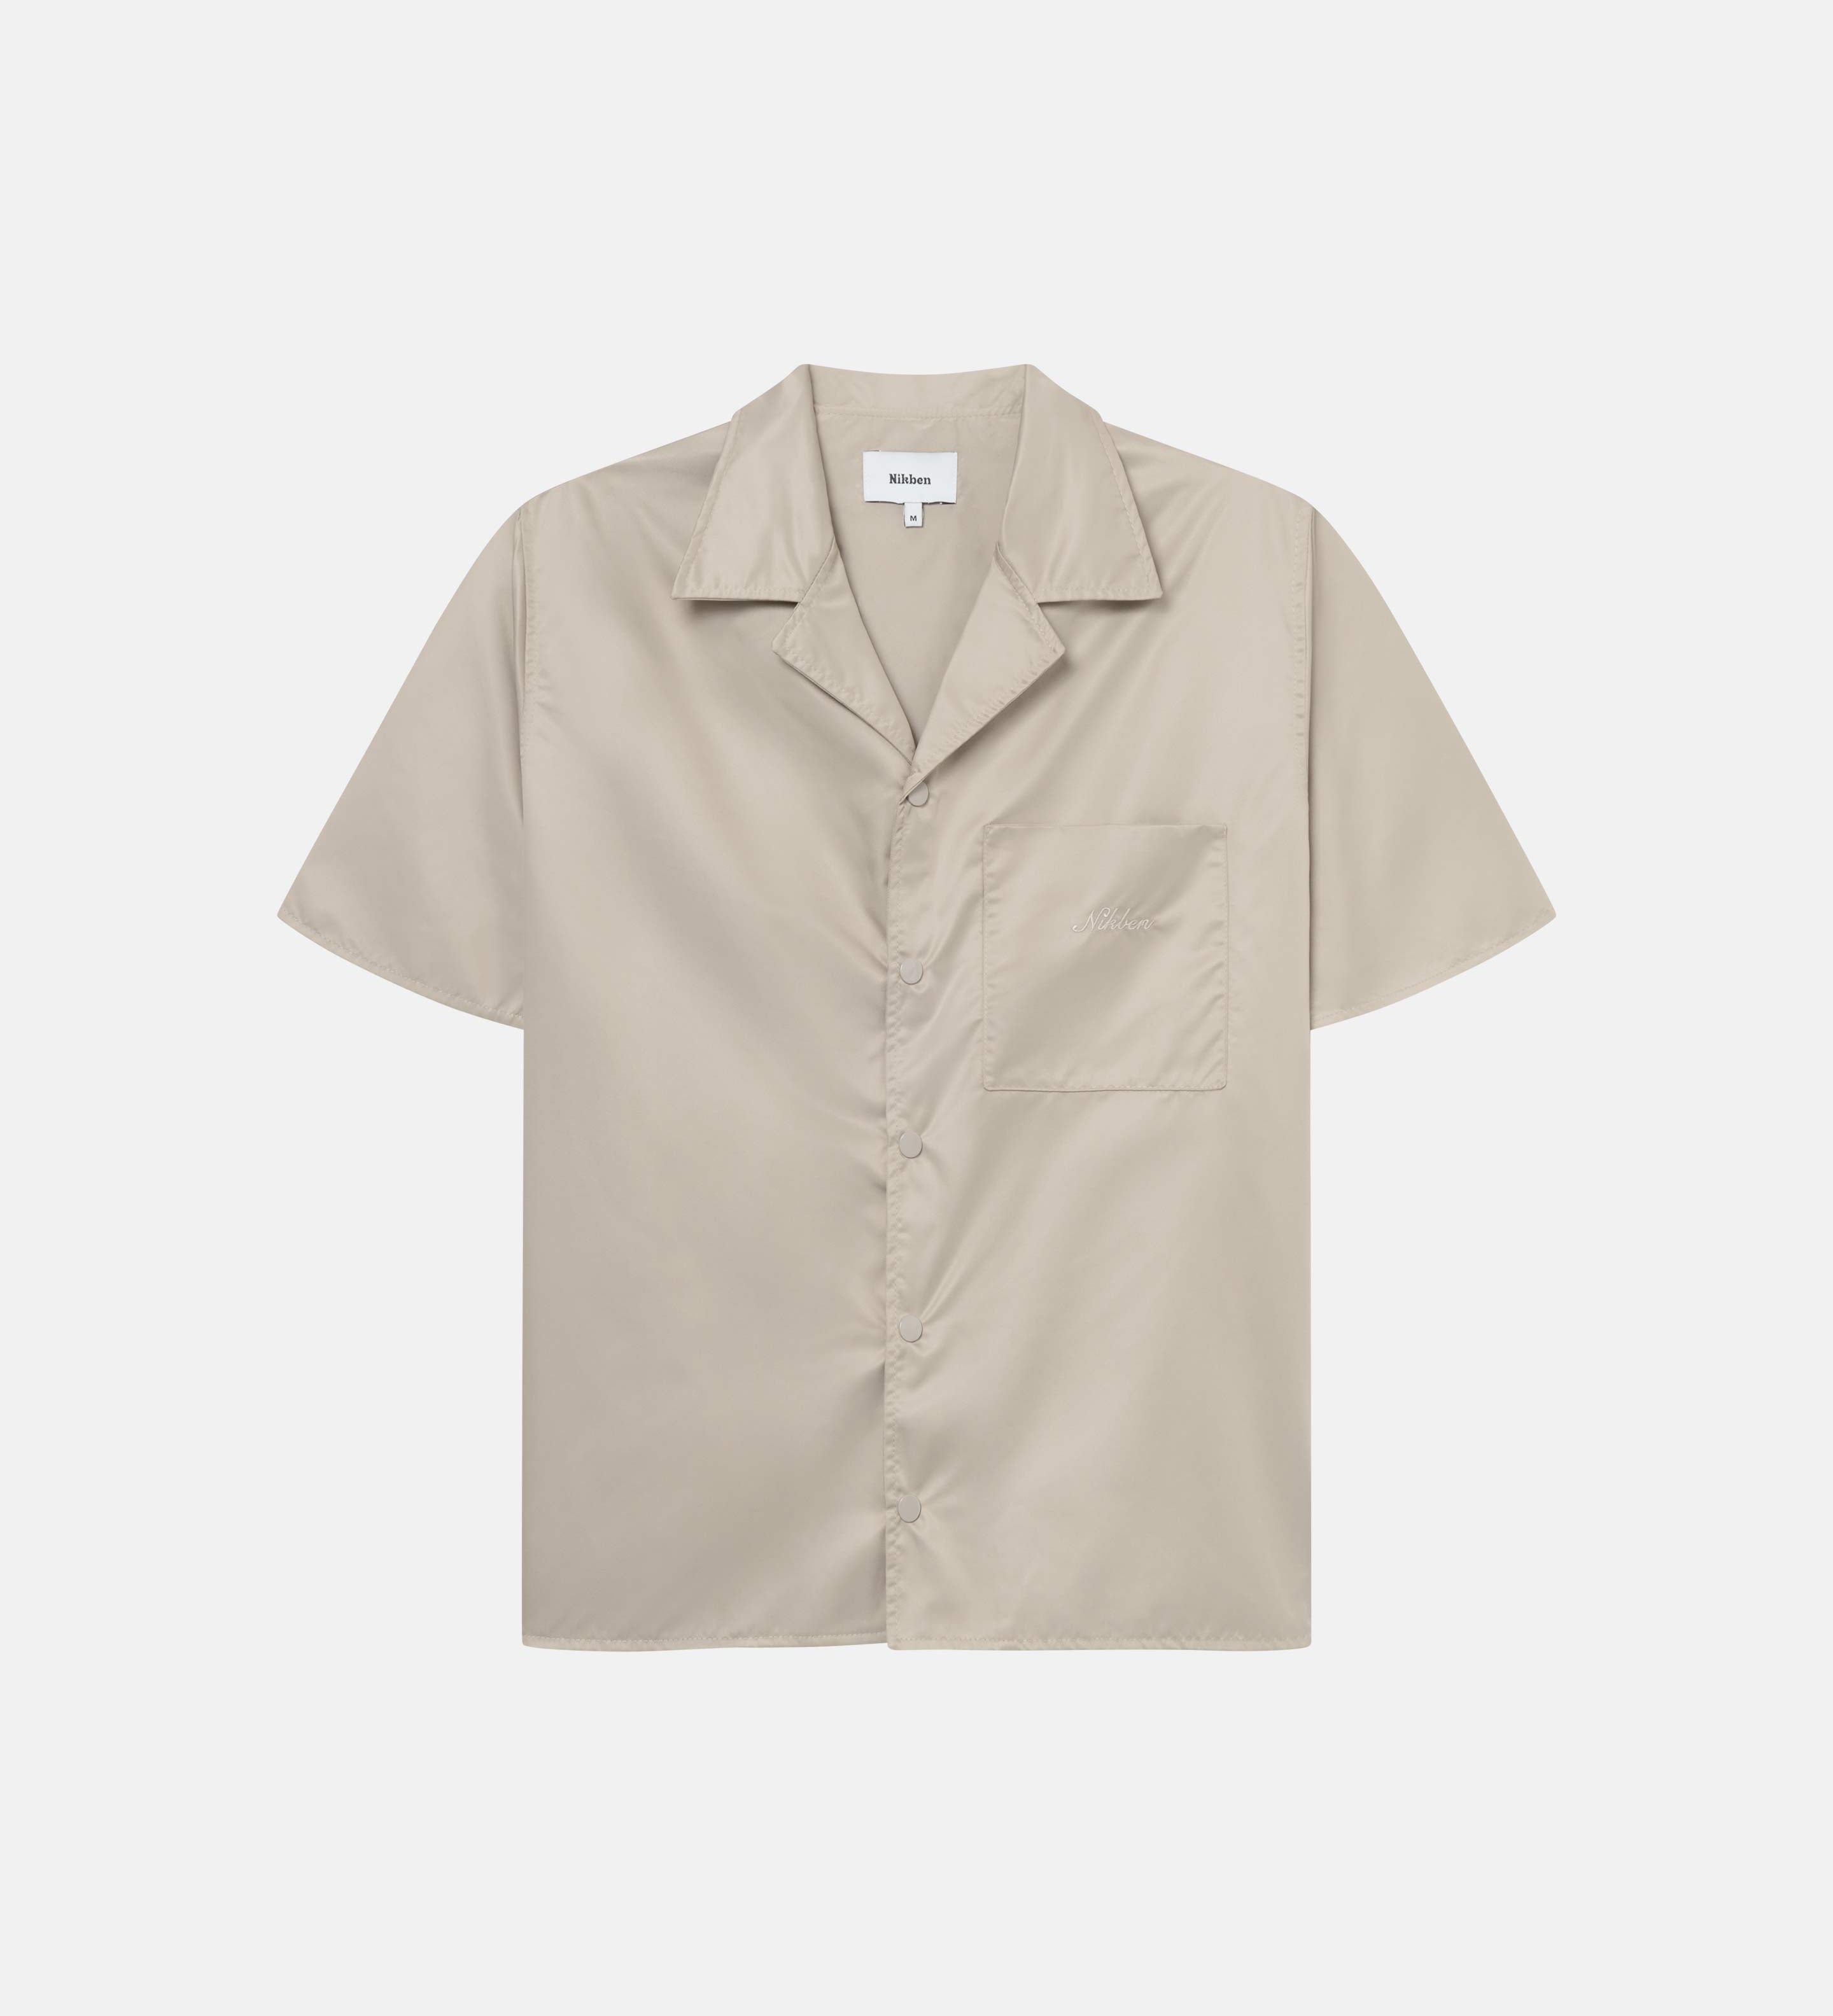 A beige short-sleeved shirt with snap button closure and embroidered Nikben logo on the breast pocket